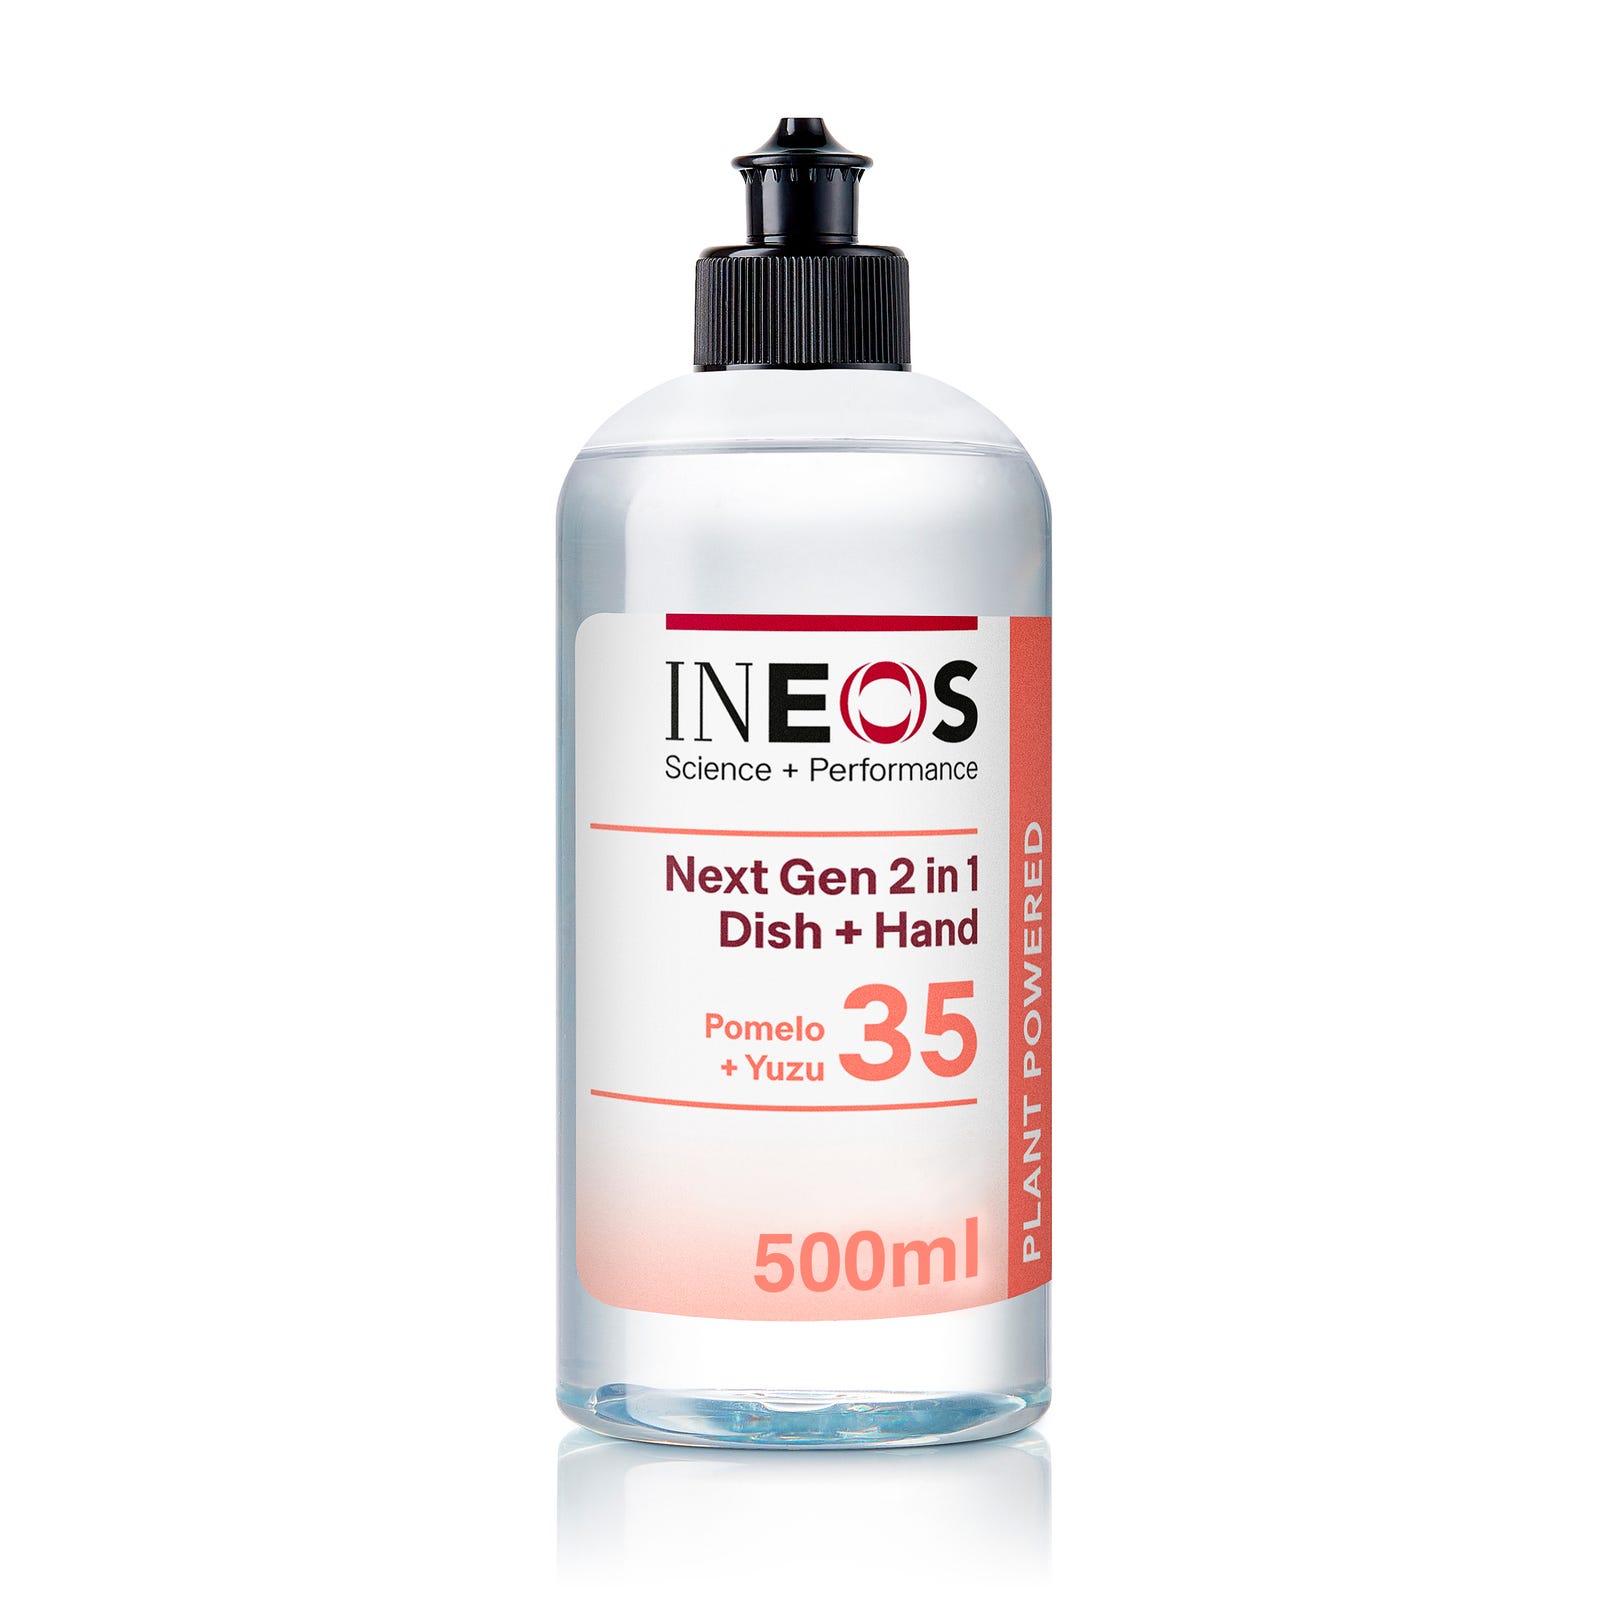 a photo of ineos hygienics new pomelo + yuzu 2-in-1 dish and hand soap